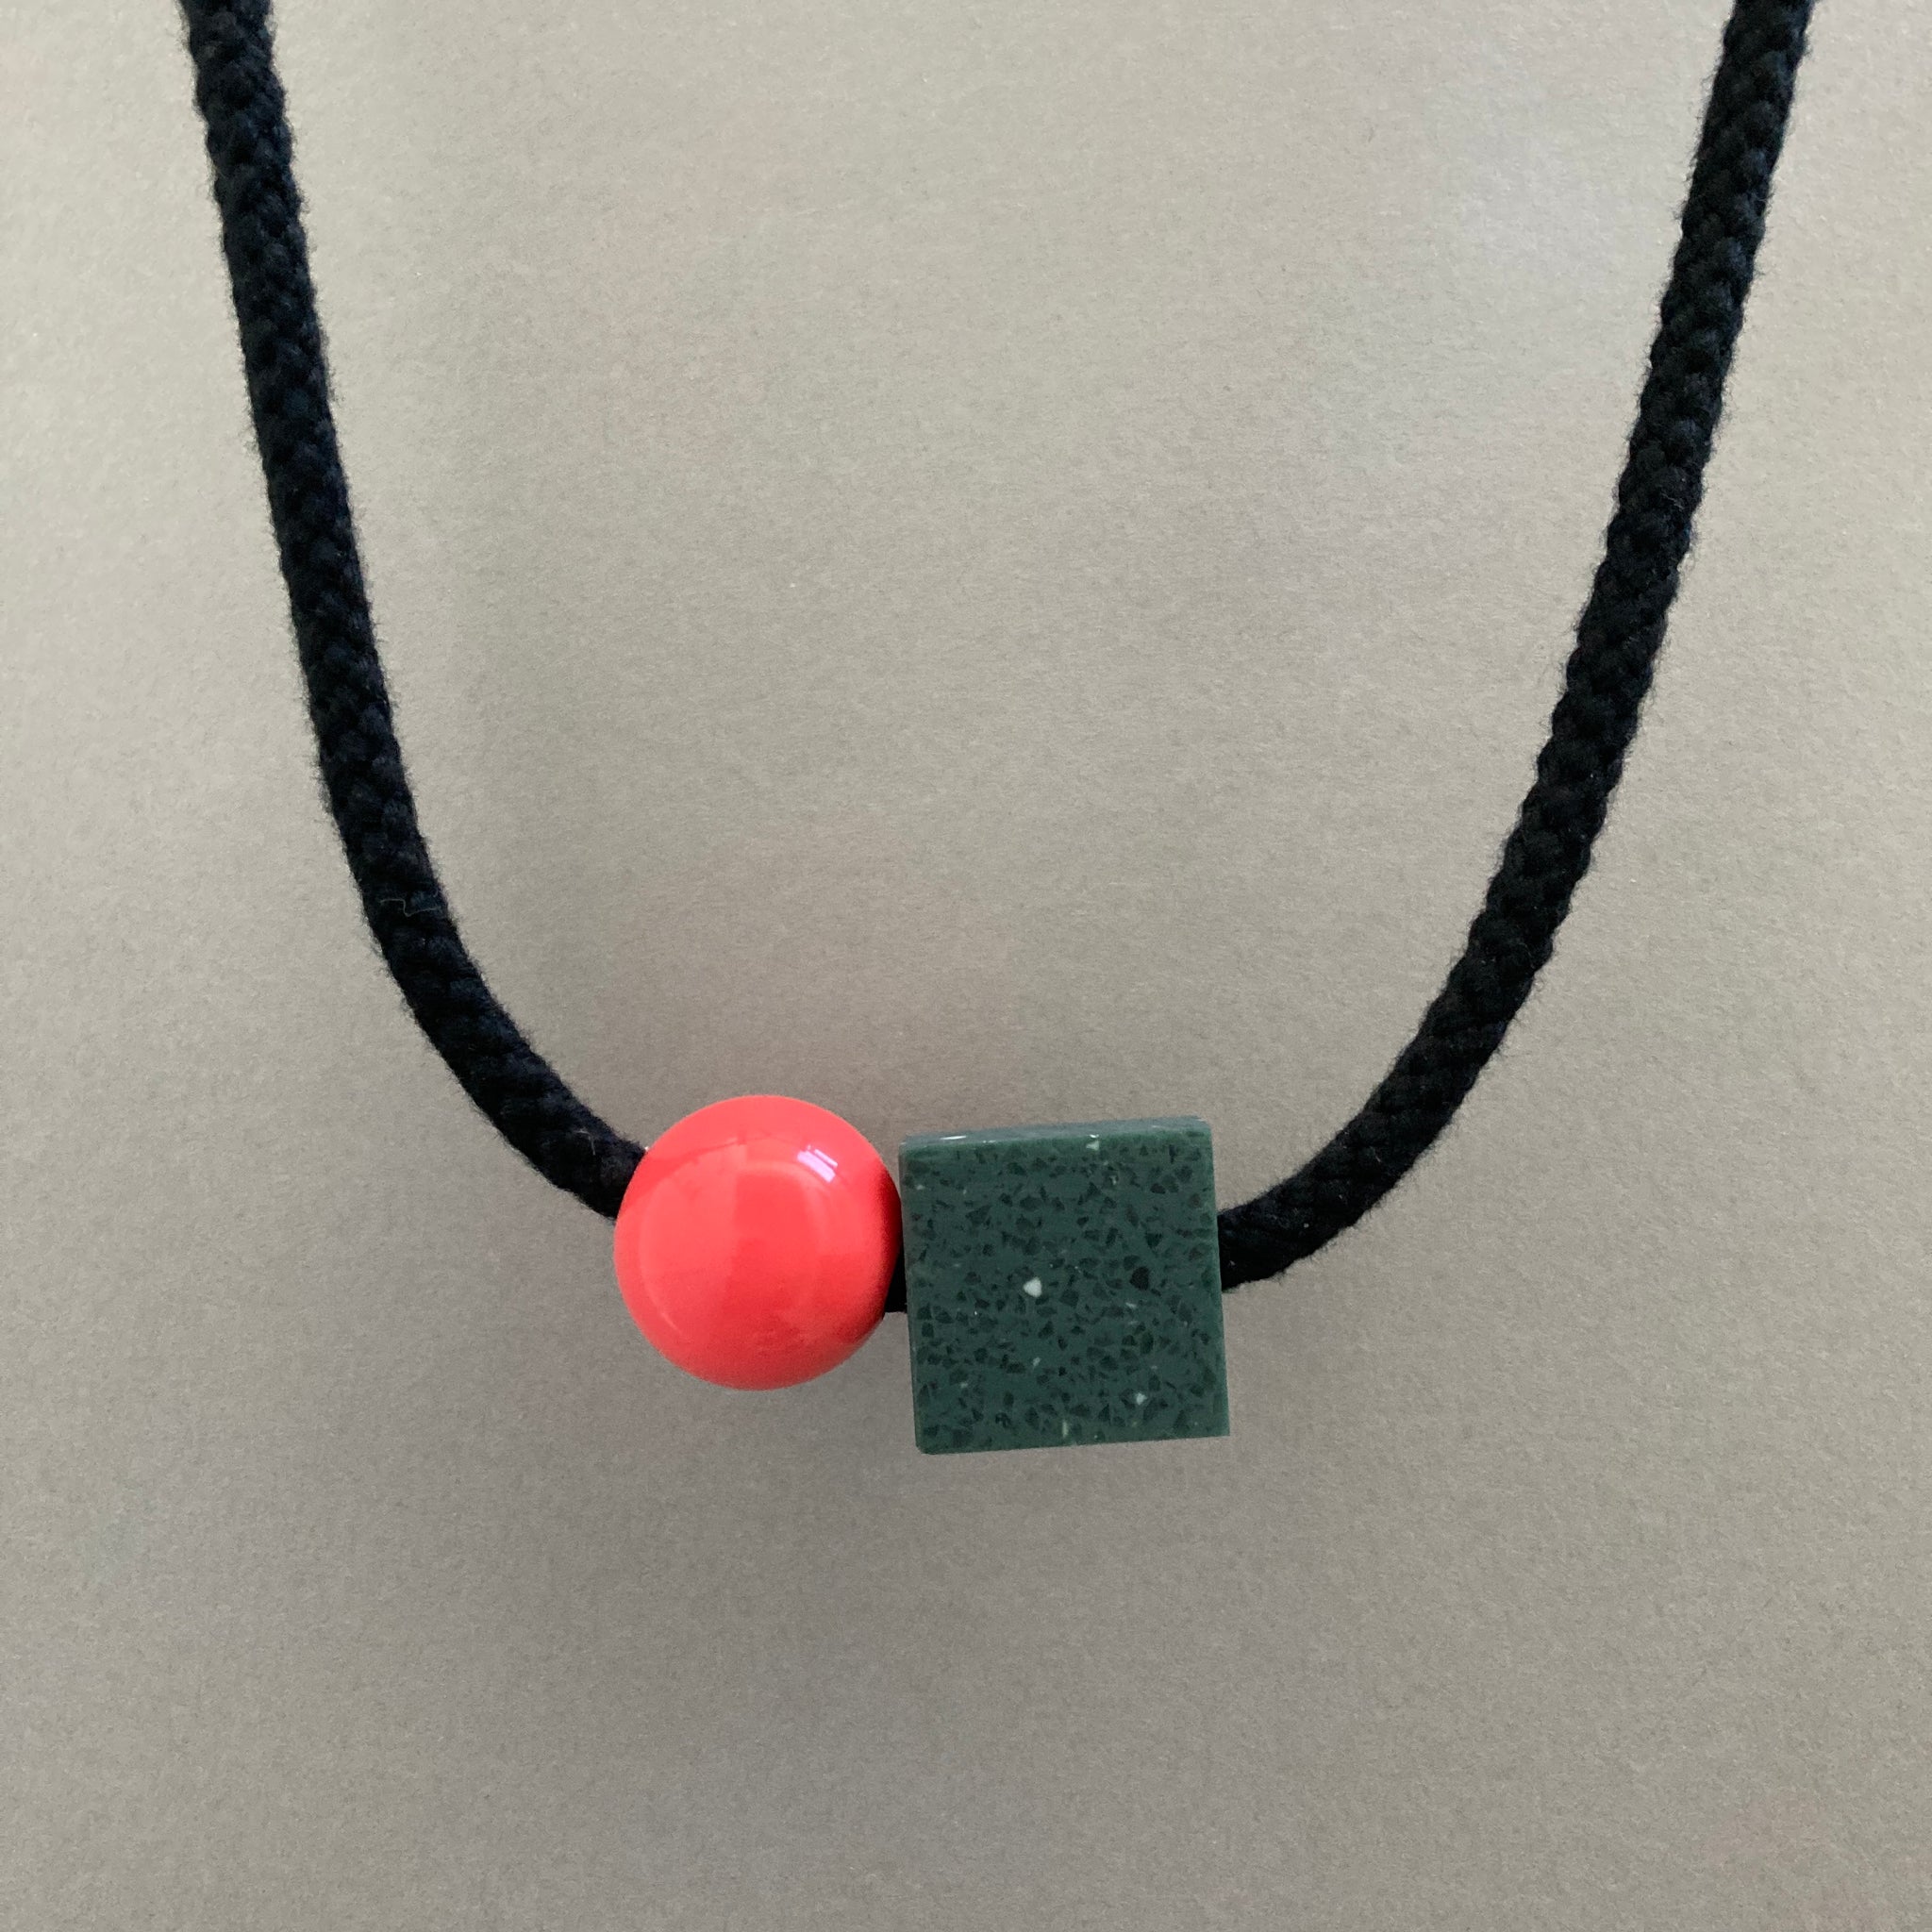 sample necklace grey/green square